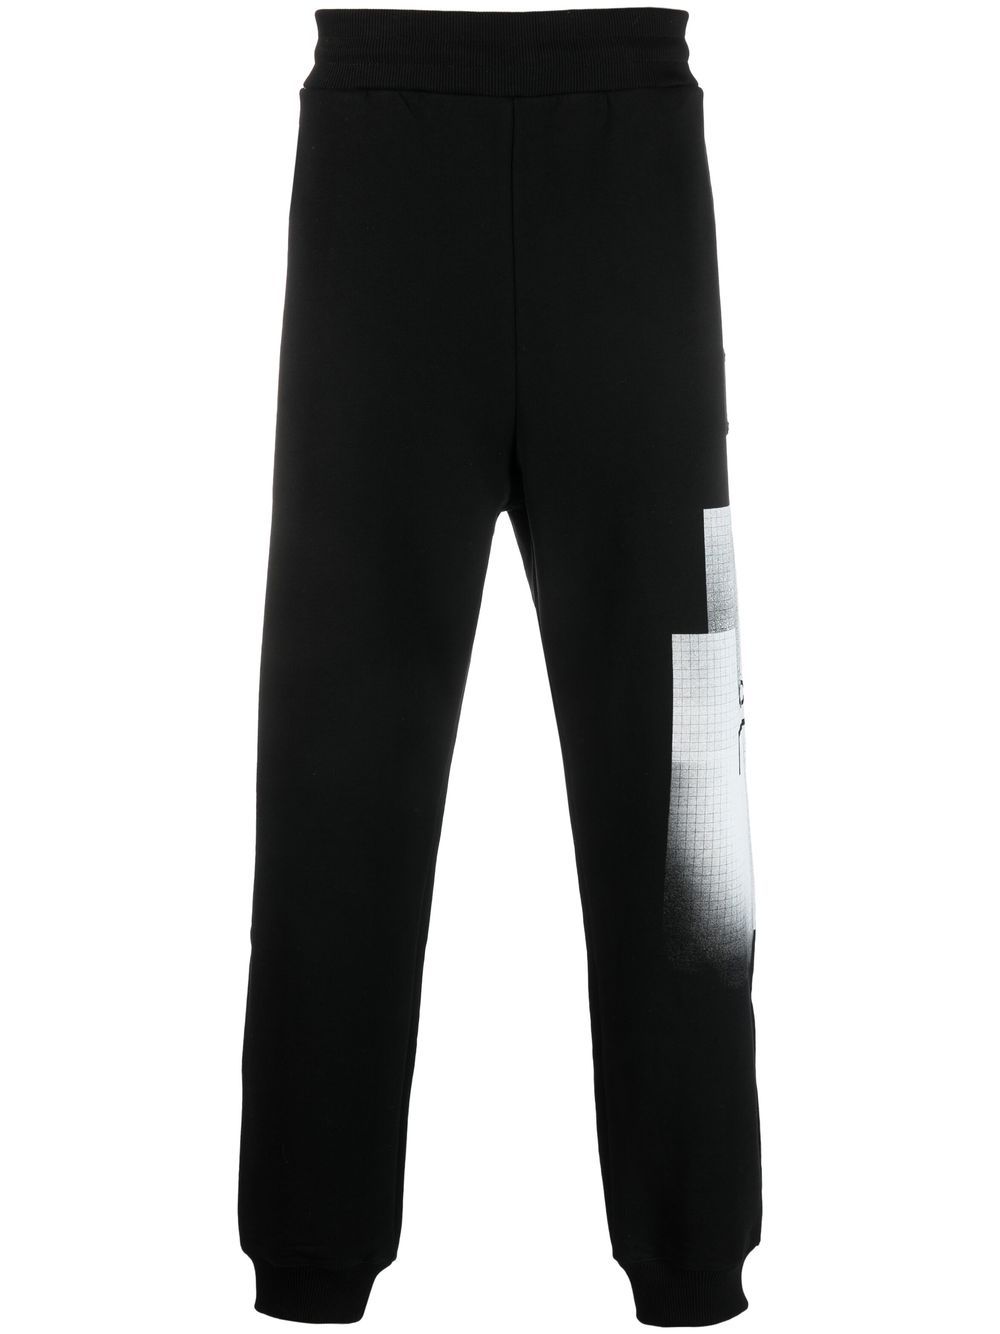 A-COLD-WALL* Brutalist logo-print track pants - Black von A-COLD-WALL*